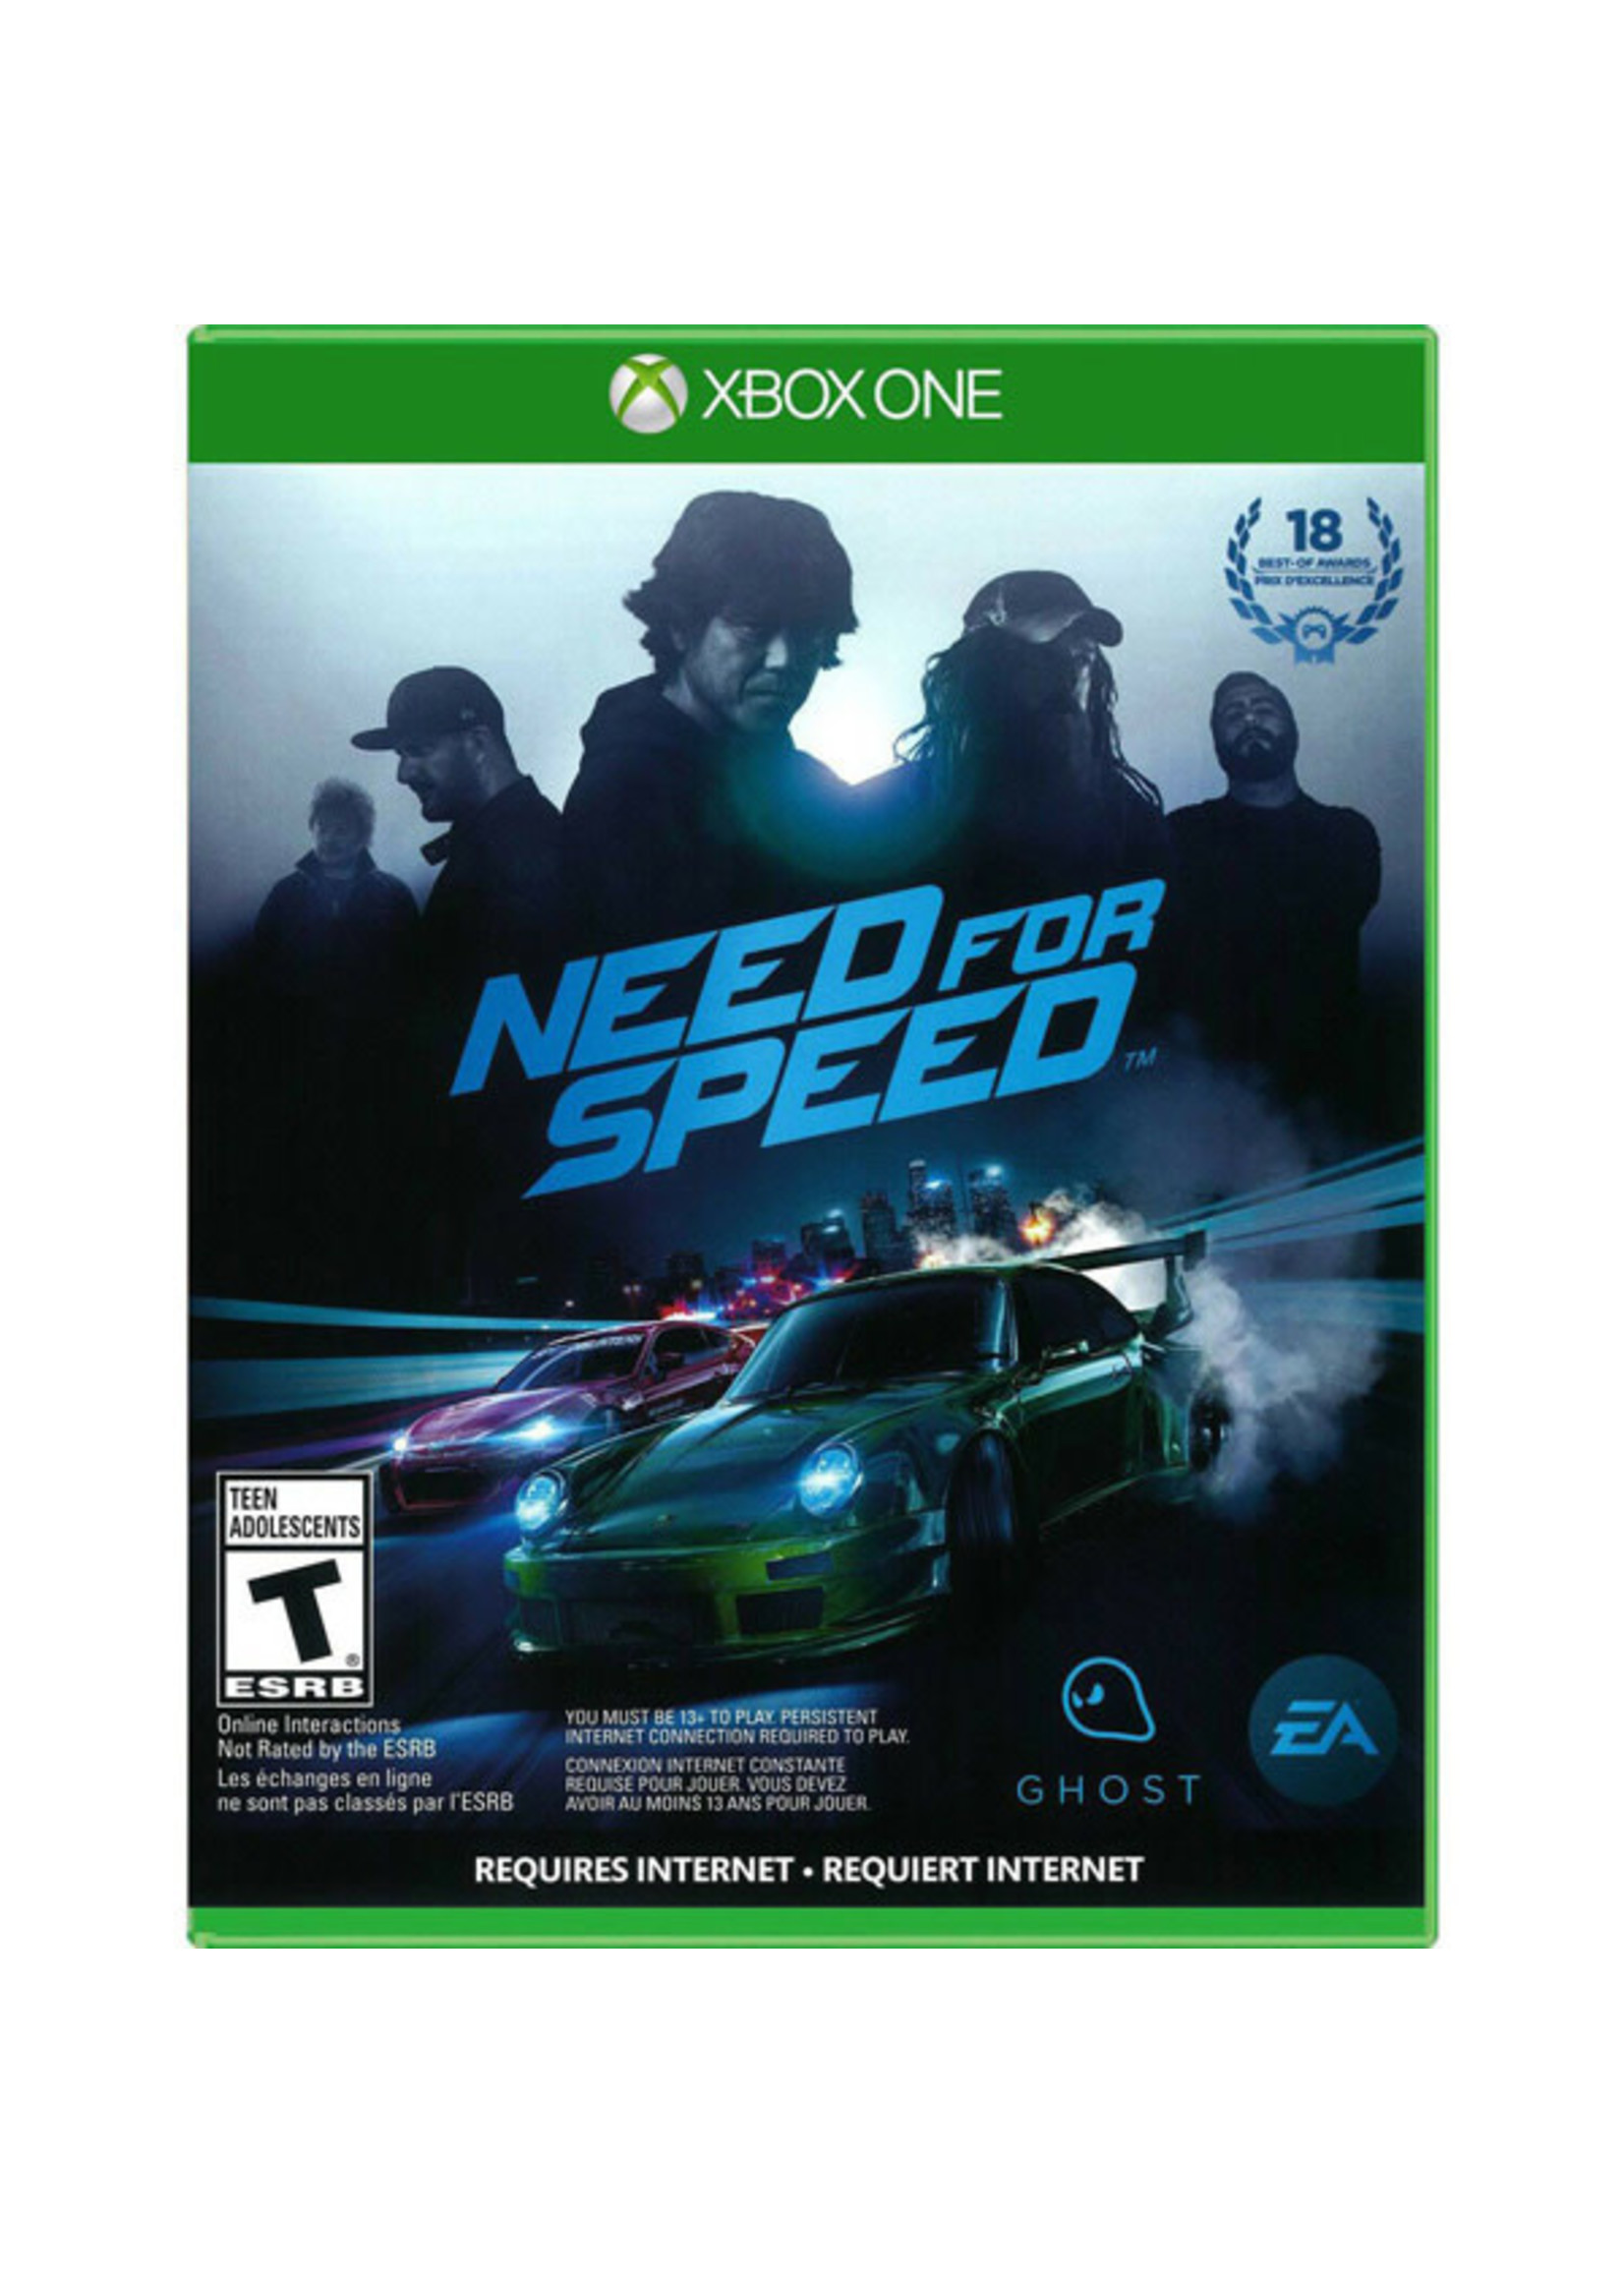 NEED FOR SPEED XBOX ONE (USAGÉ)